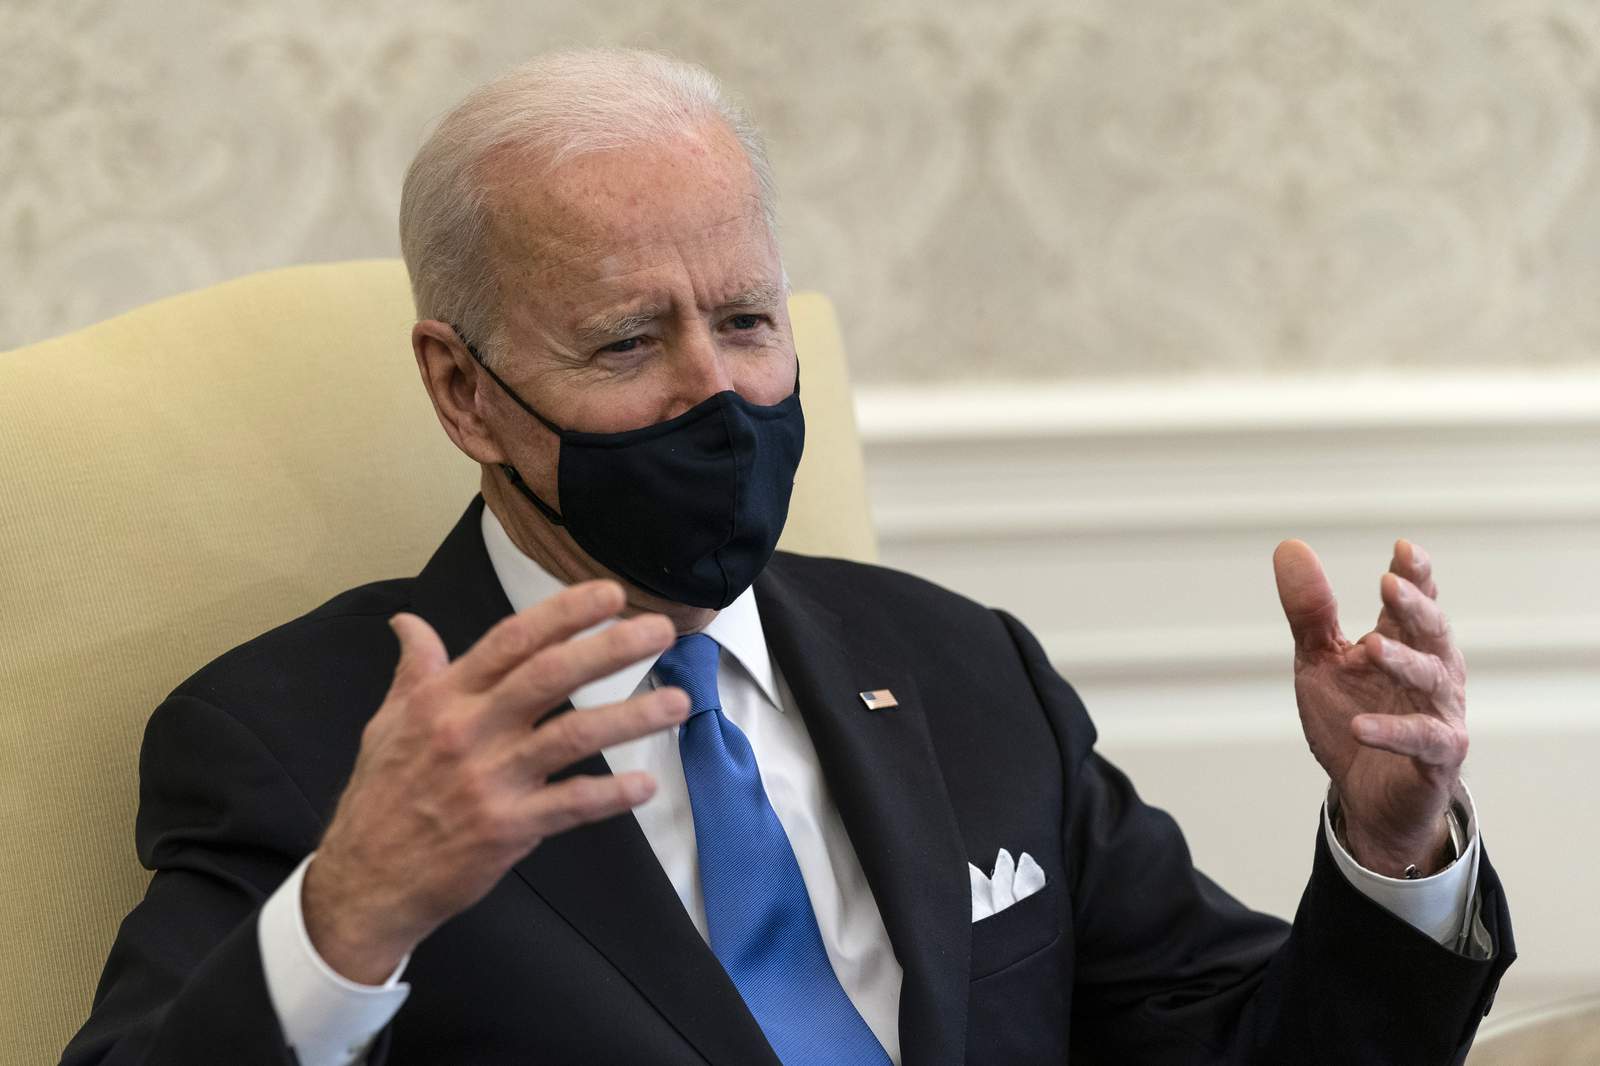 ‘Big mistake’ by Texas to drop mask rule, Biden says